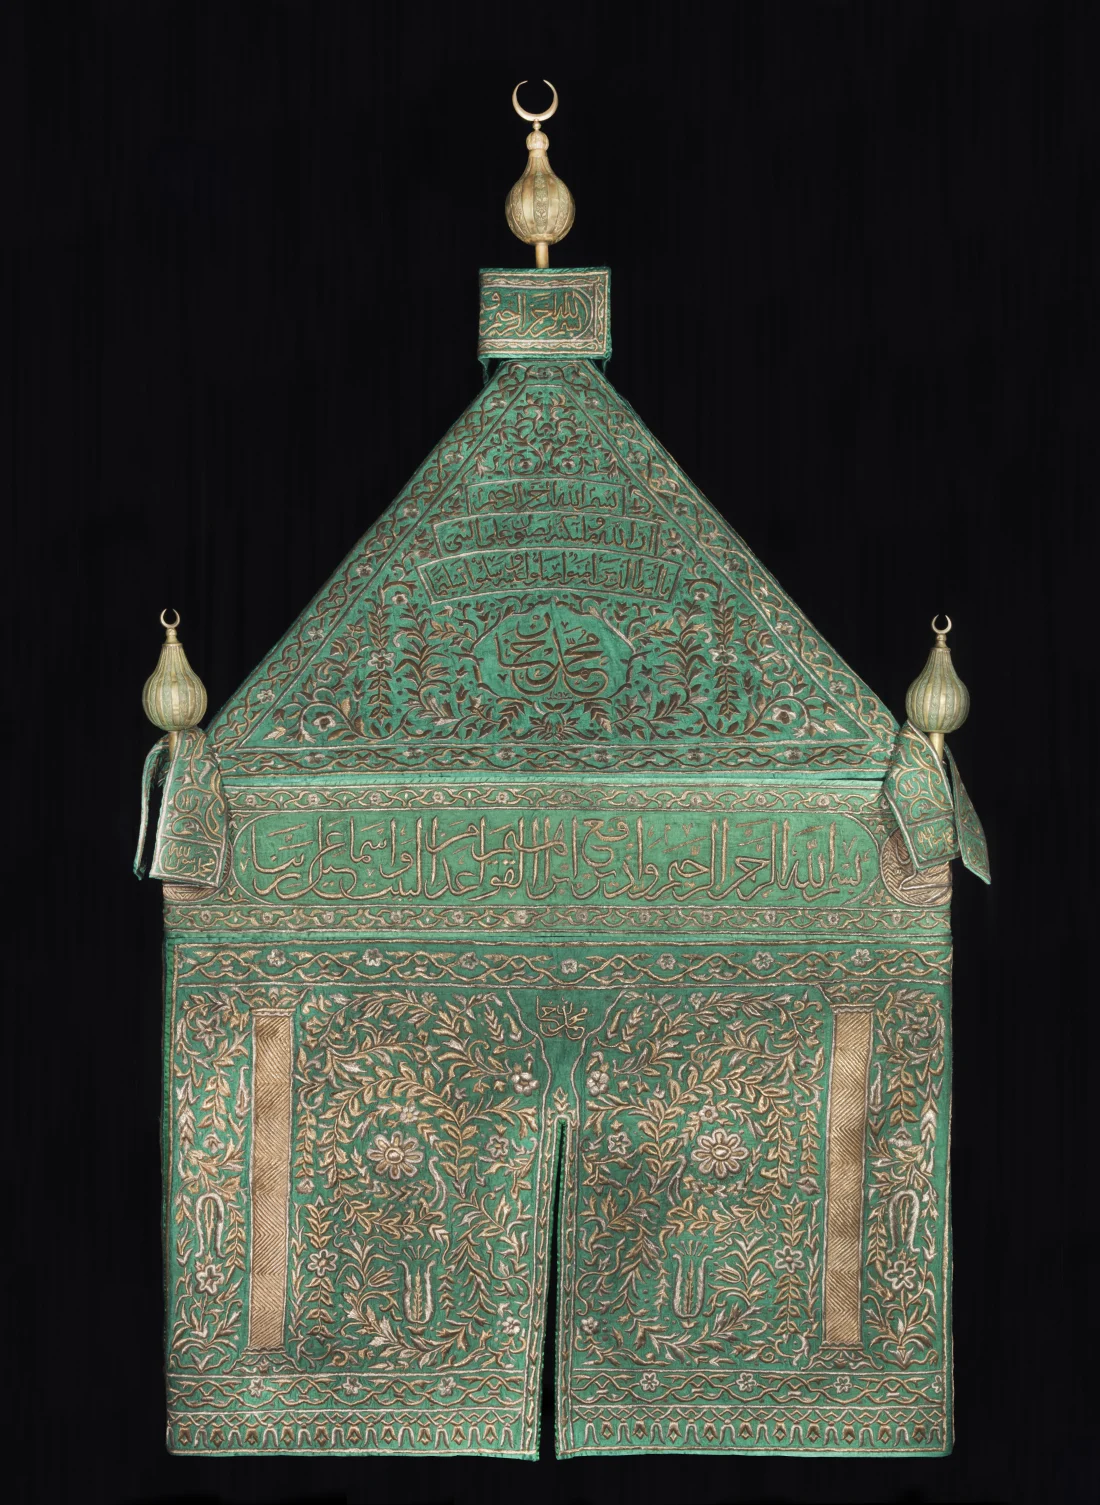 mahmal cover and finial banners of green silk, embroidered in silver and silver-gilt wire over cotton thread padding; finials of gilded copper alloy are of a later date